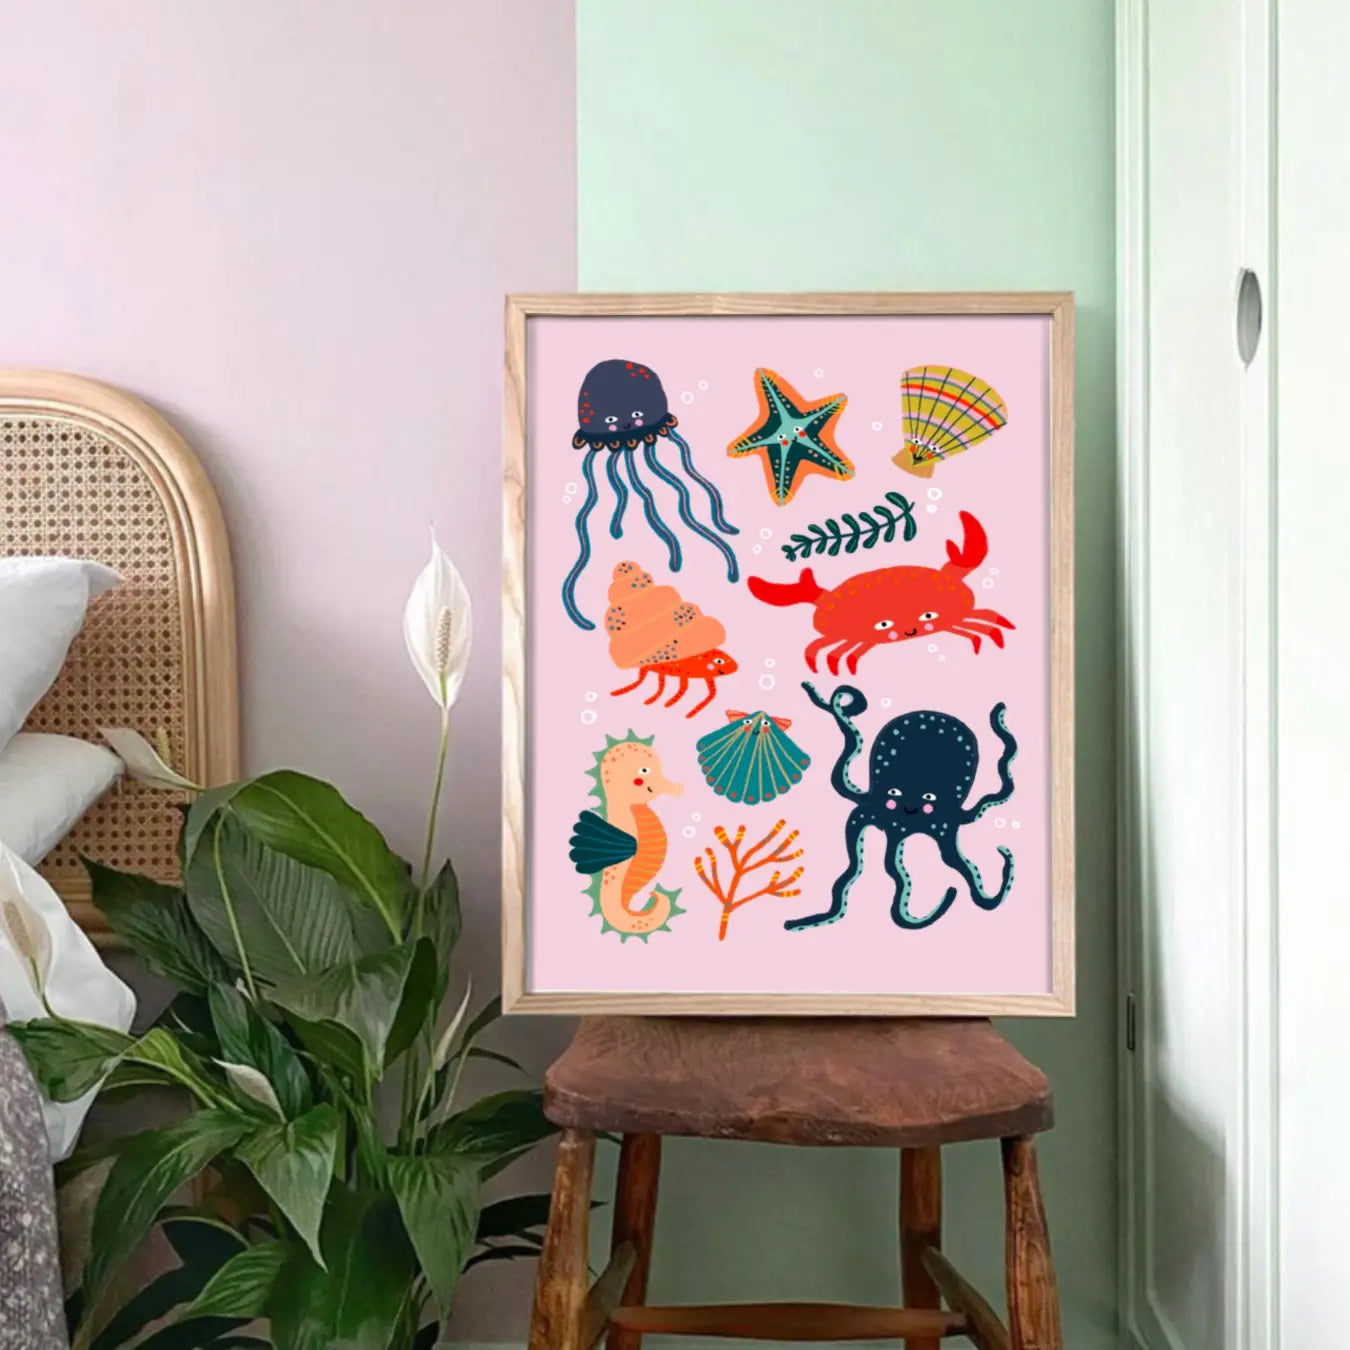 children's print with colourful characters including a crab, seahorse, octopus starfish and much more, sitting on a wooden chair, against a mint green wall and next to a plant